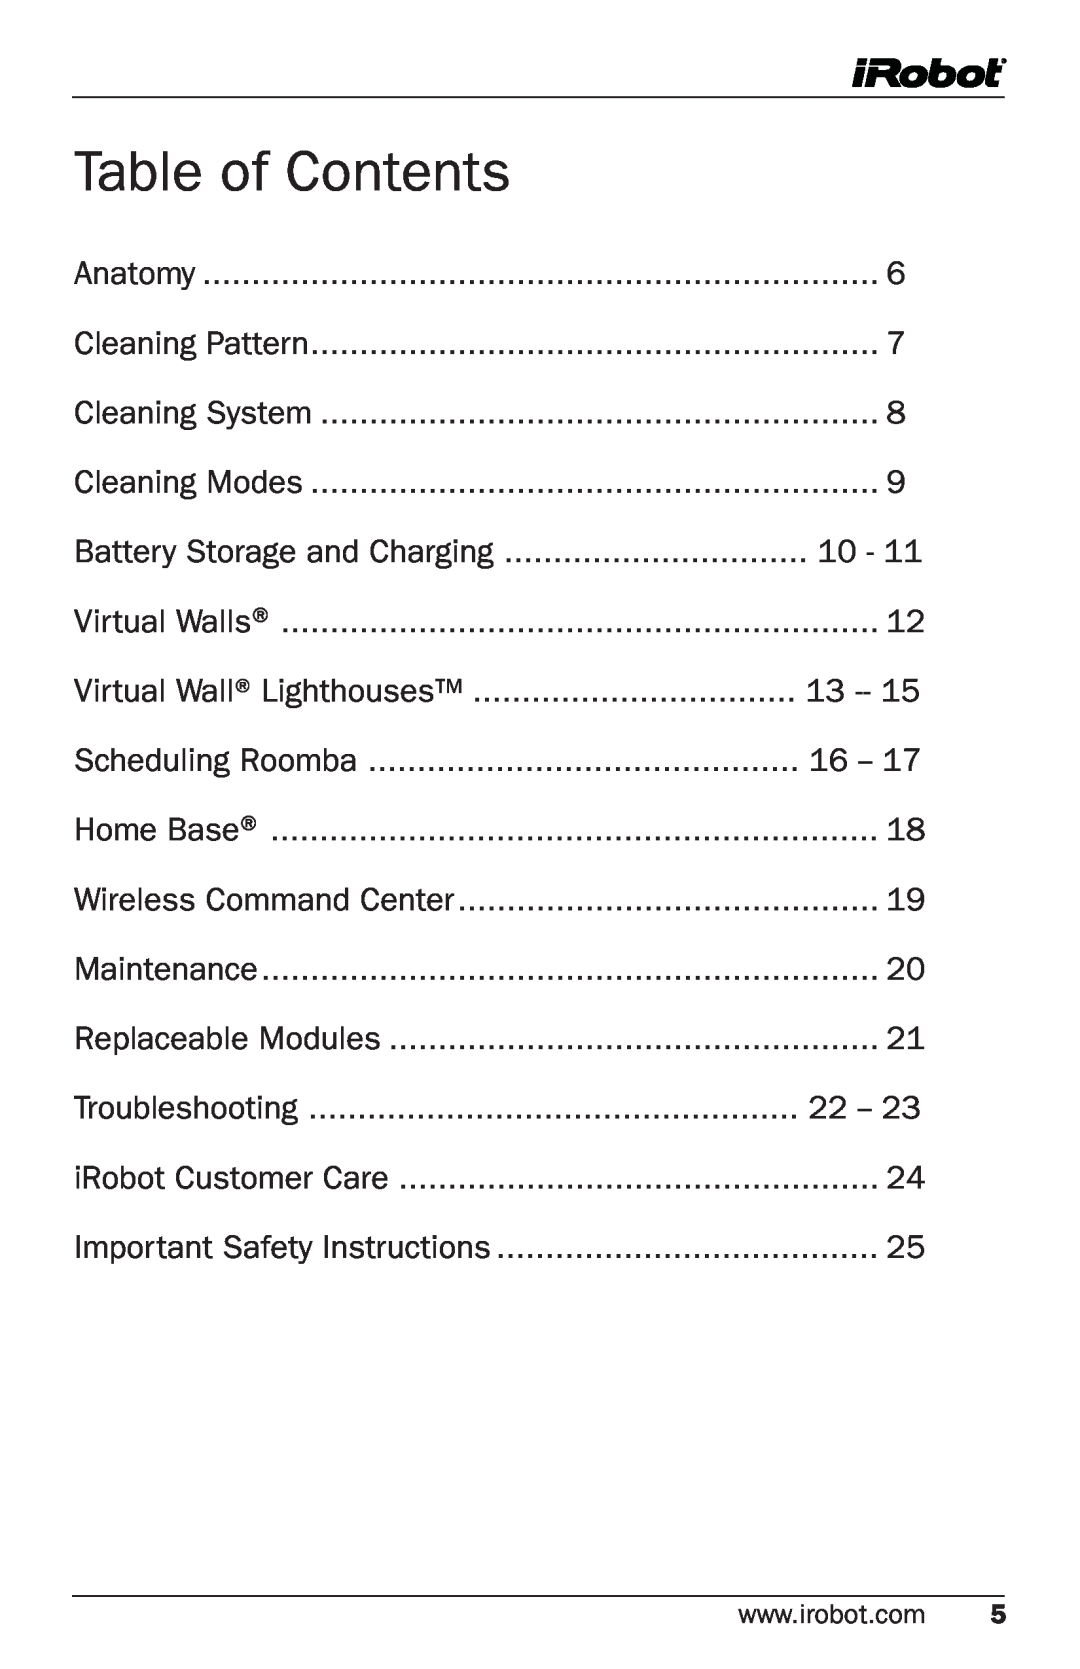 iRobot 500 Series manual Table of Contents 